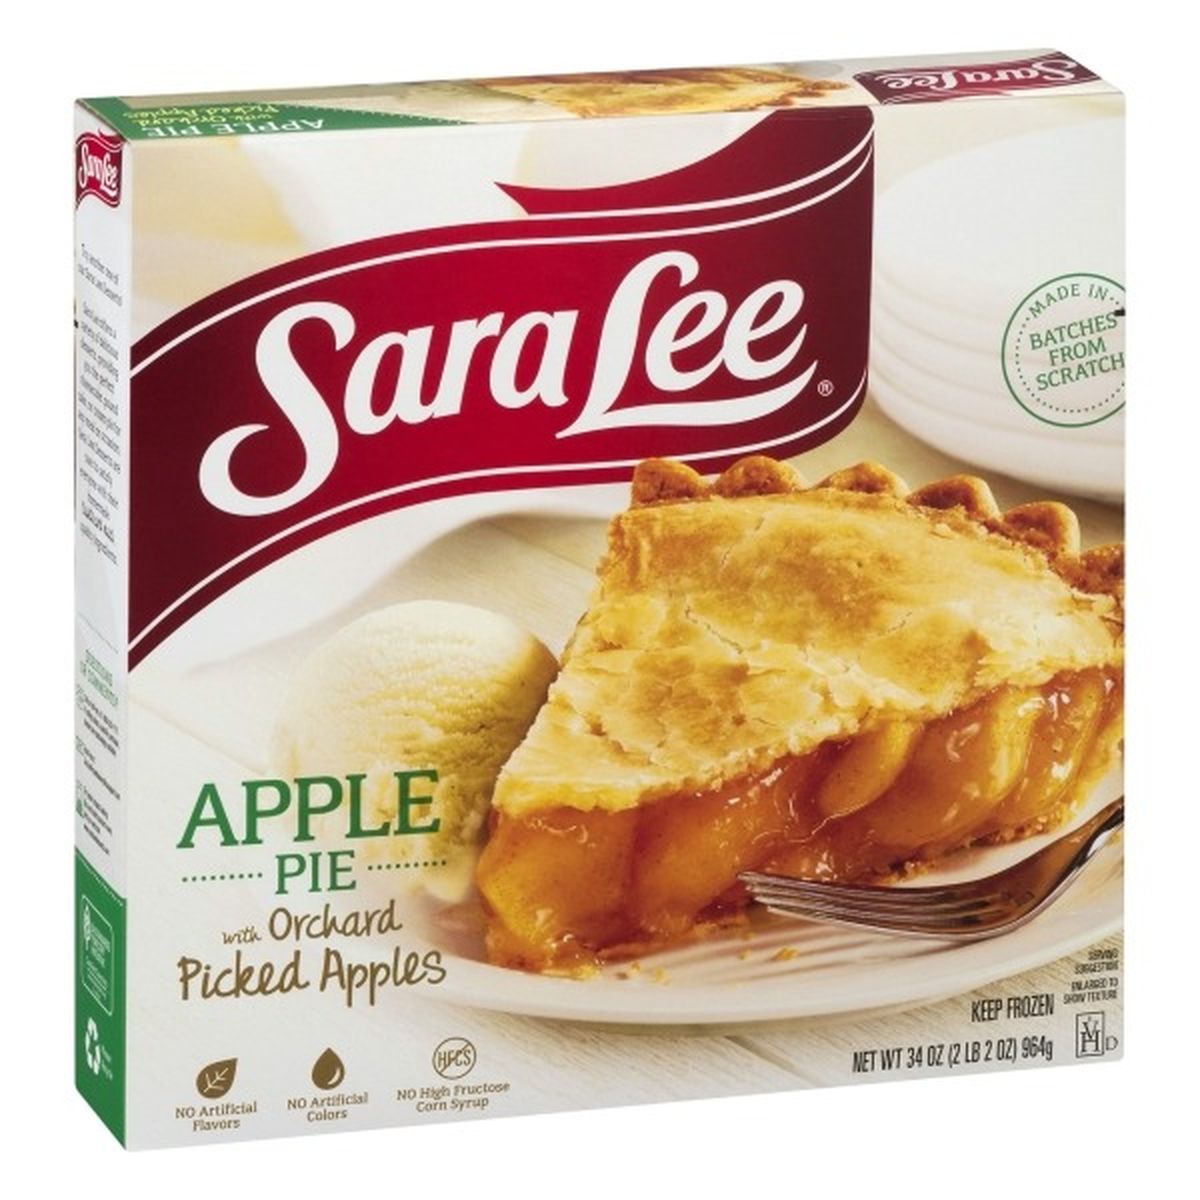 Calories in Sara Lee Pie, with Orchard Picked Apples, Apple